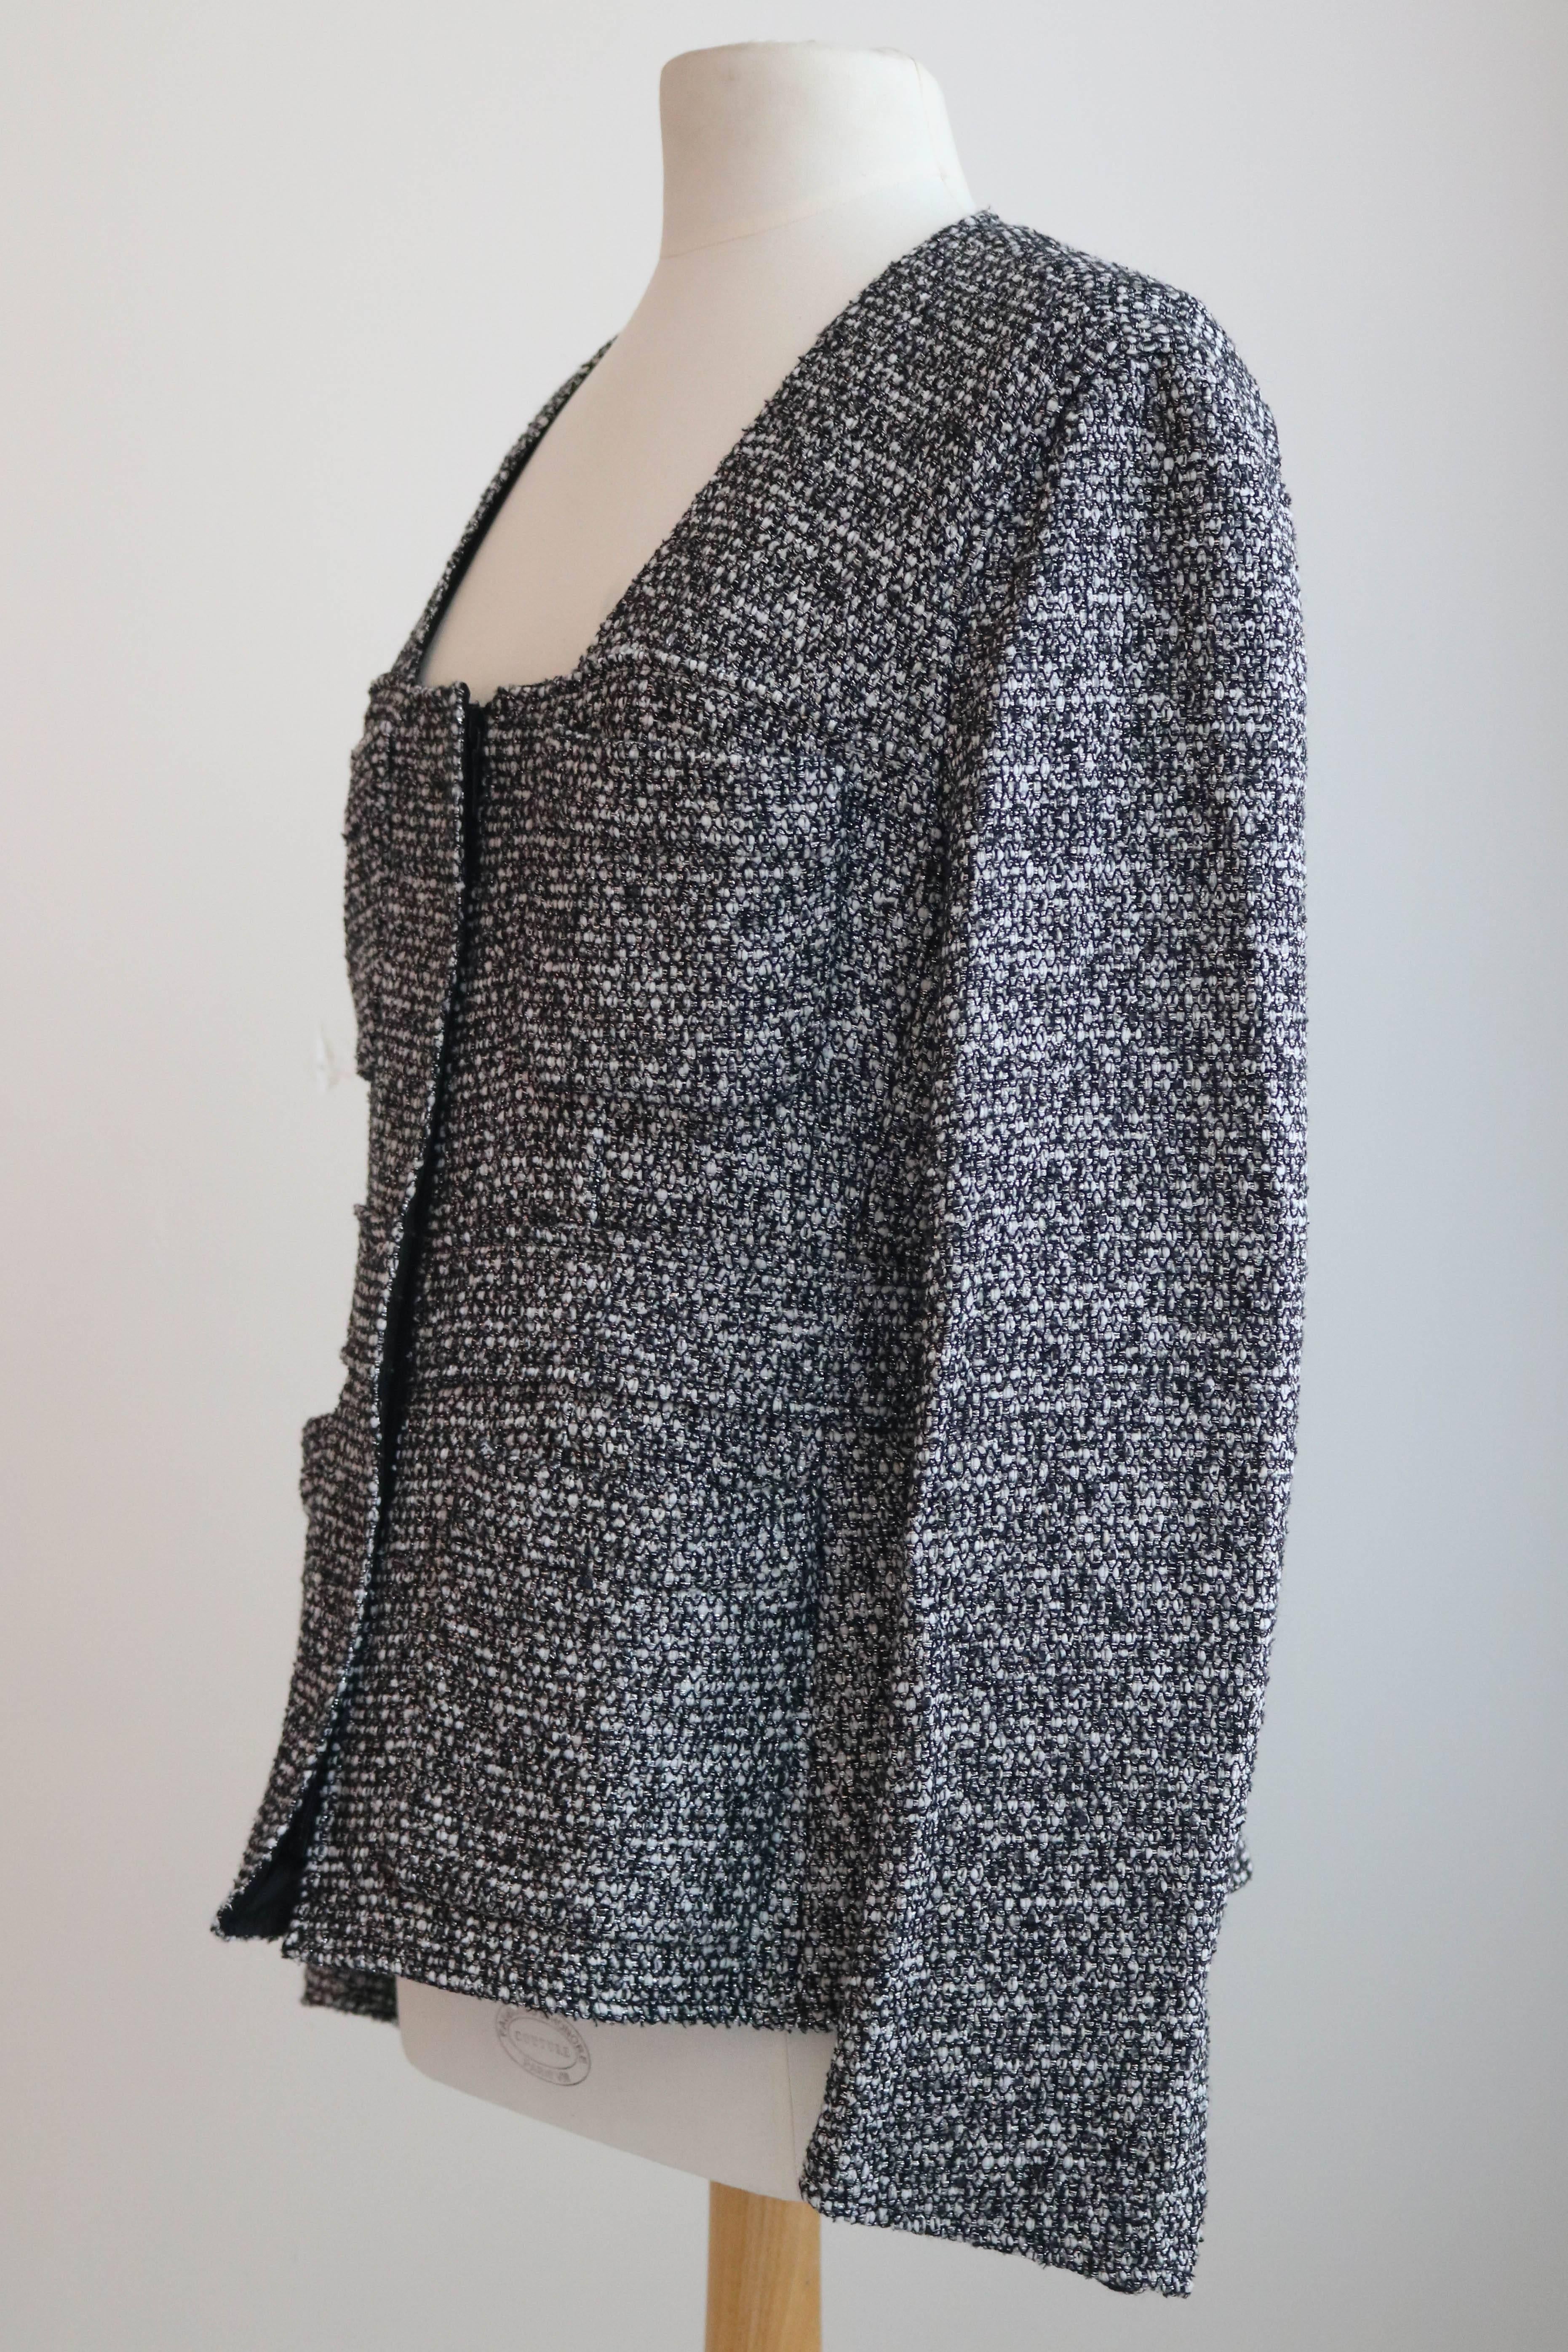 Yves Saint Laurent Rive Gauche YSL Tweed Jacket with Zipper 46 In Excellent Condition In San Francisco, CA